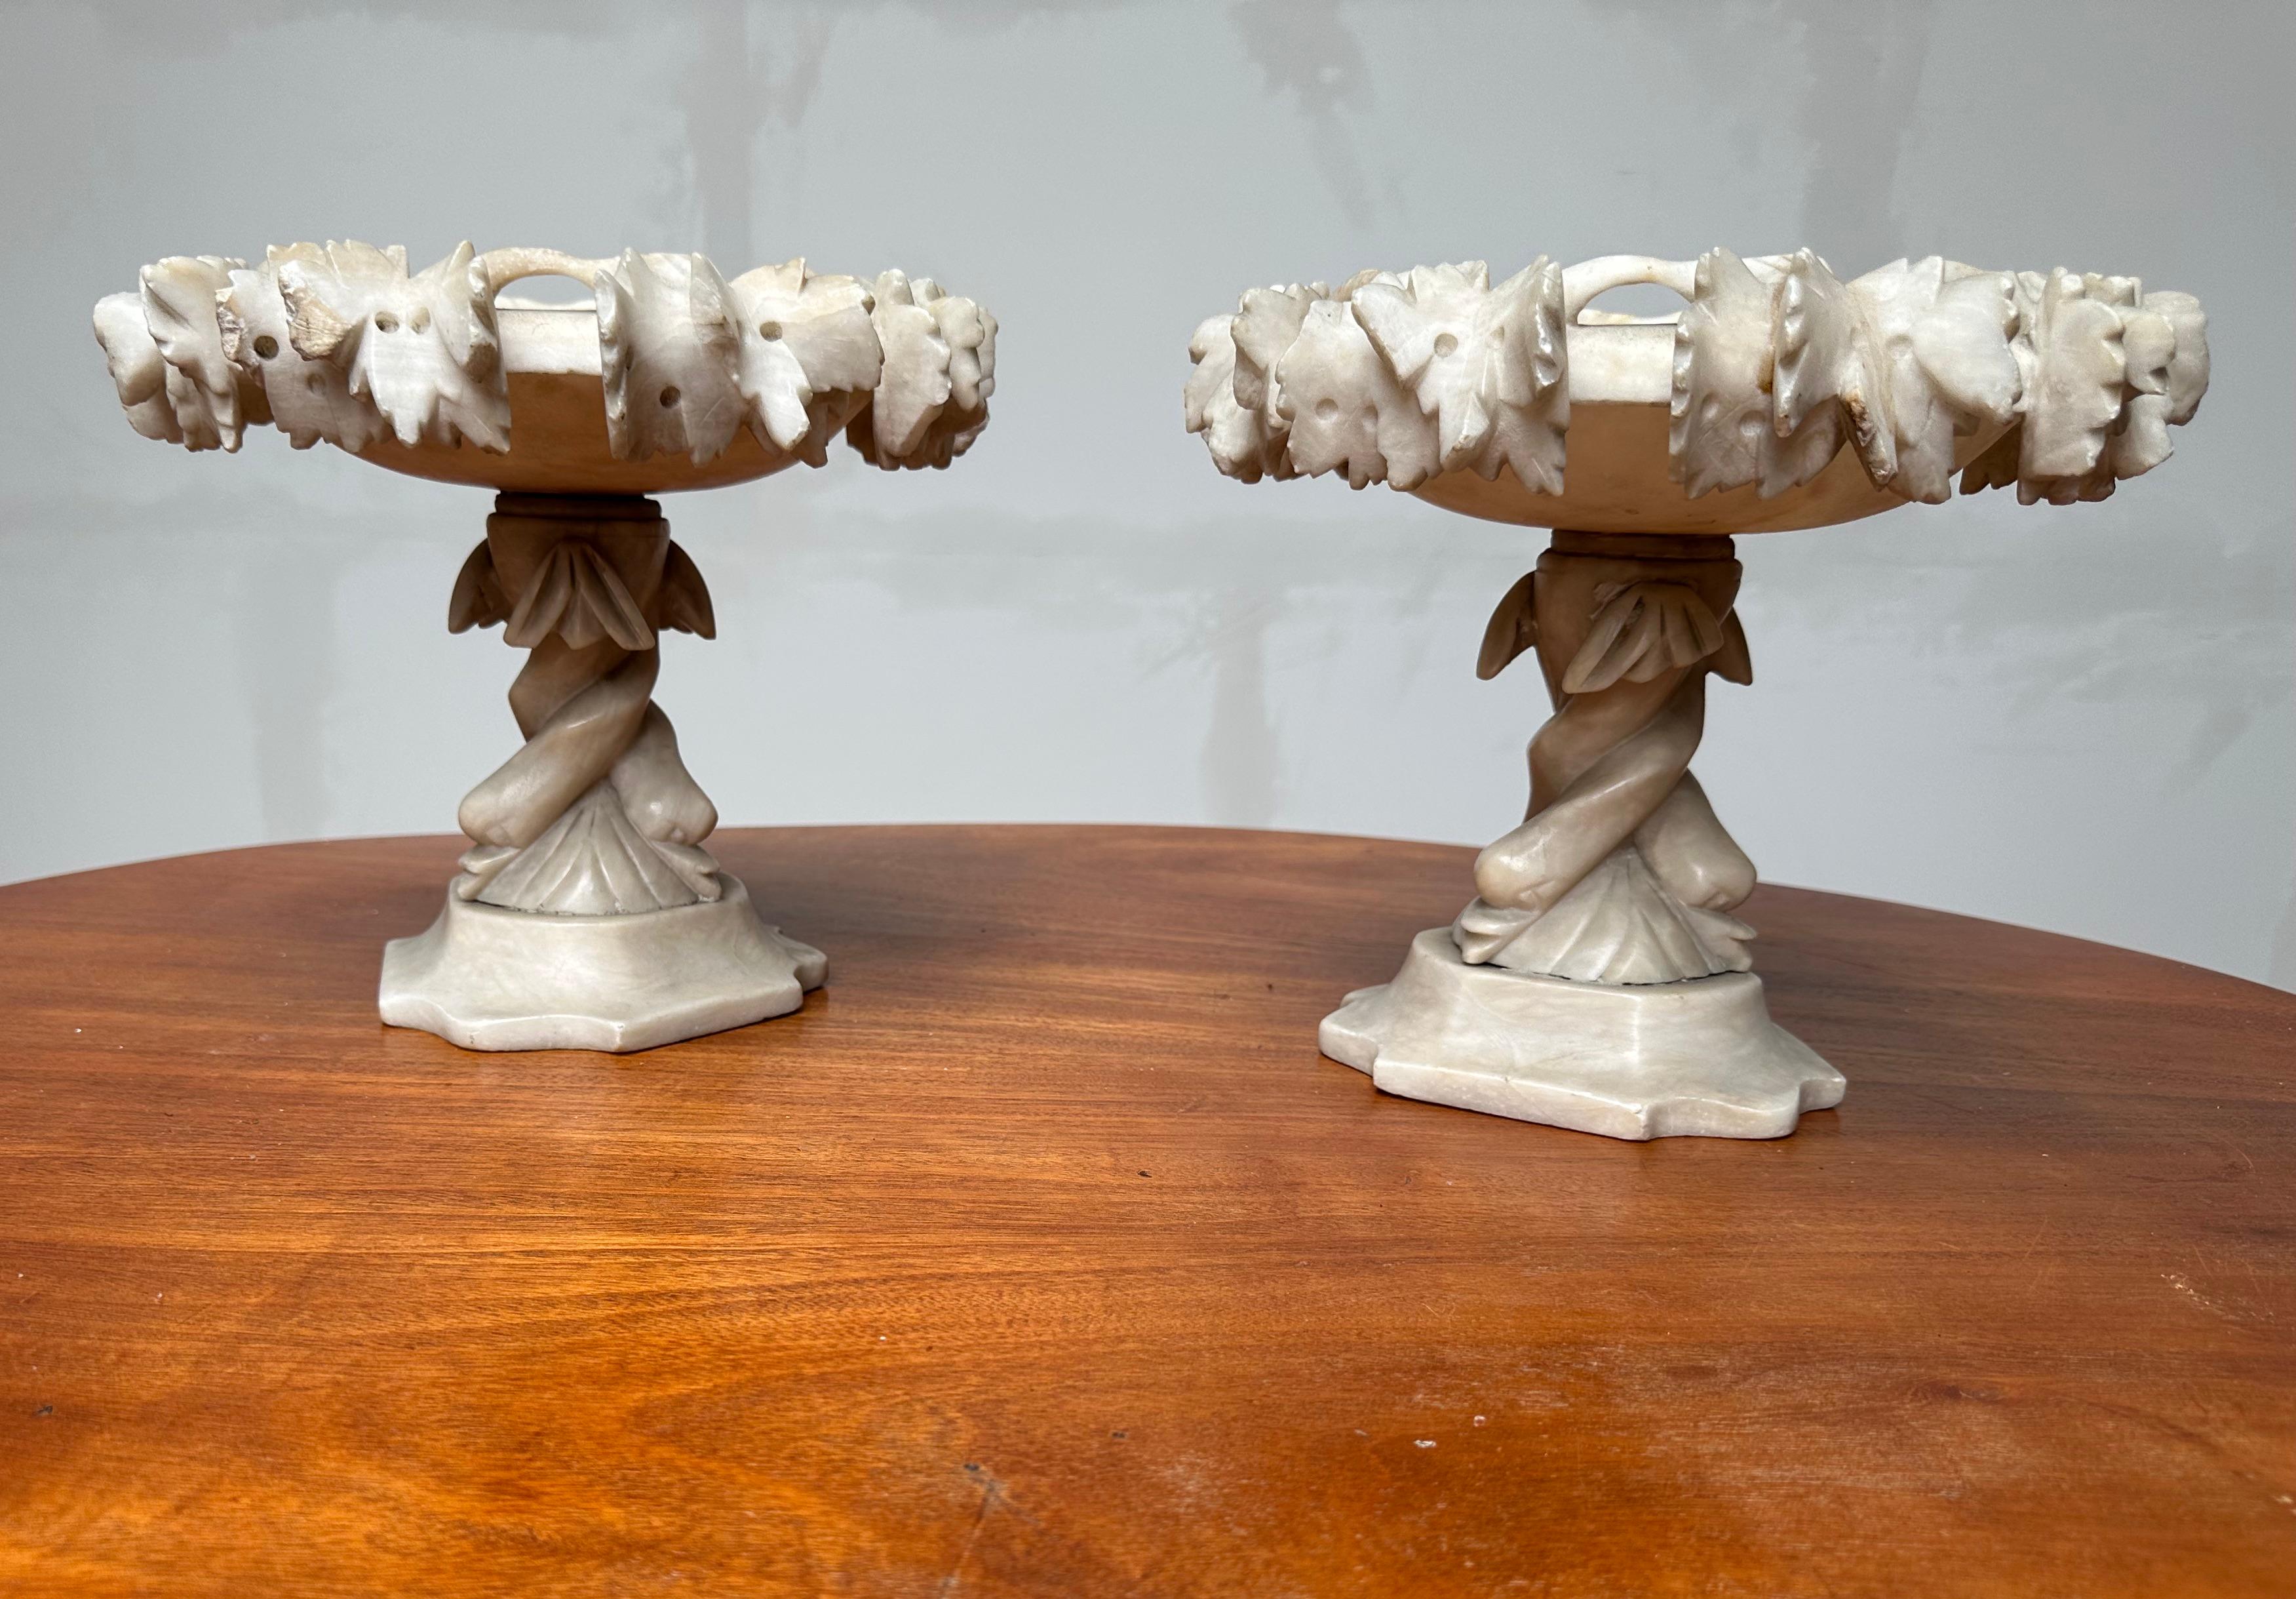 All handcrafted out of alabaster these stylish & decorative tazzas make great centrepieces.

This rare pair of early 1900s tazzas comes with overhanging wine branches all around the circular tops. Finding this pair of Renaissance Revival tazzas more